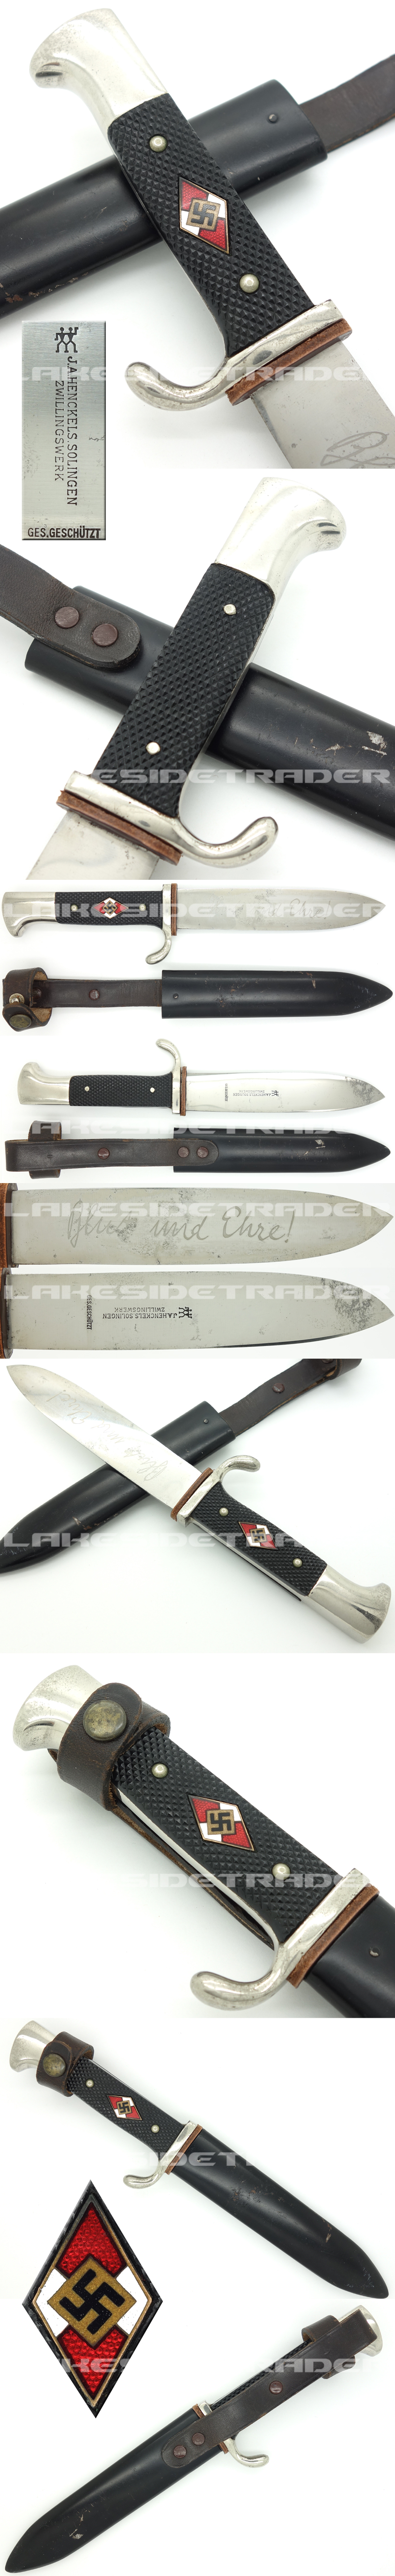 Minty - Early Hitler Youth Knife by J.A. Henckels